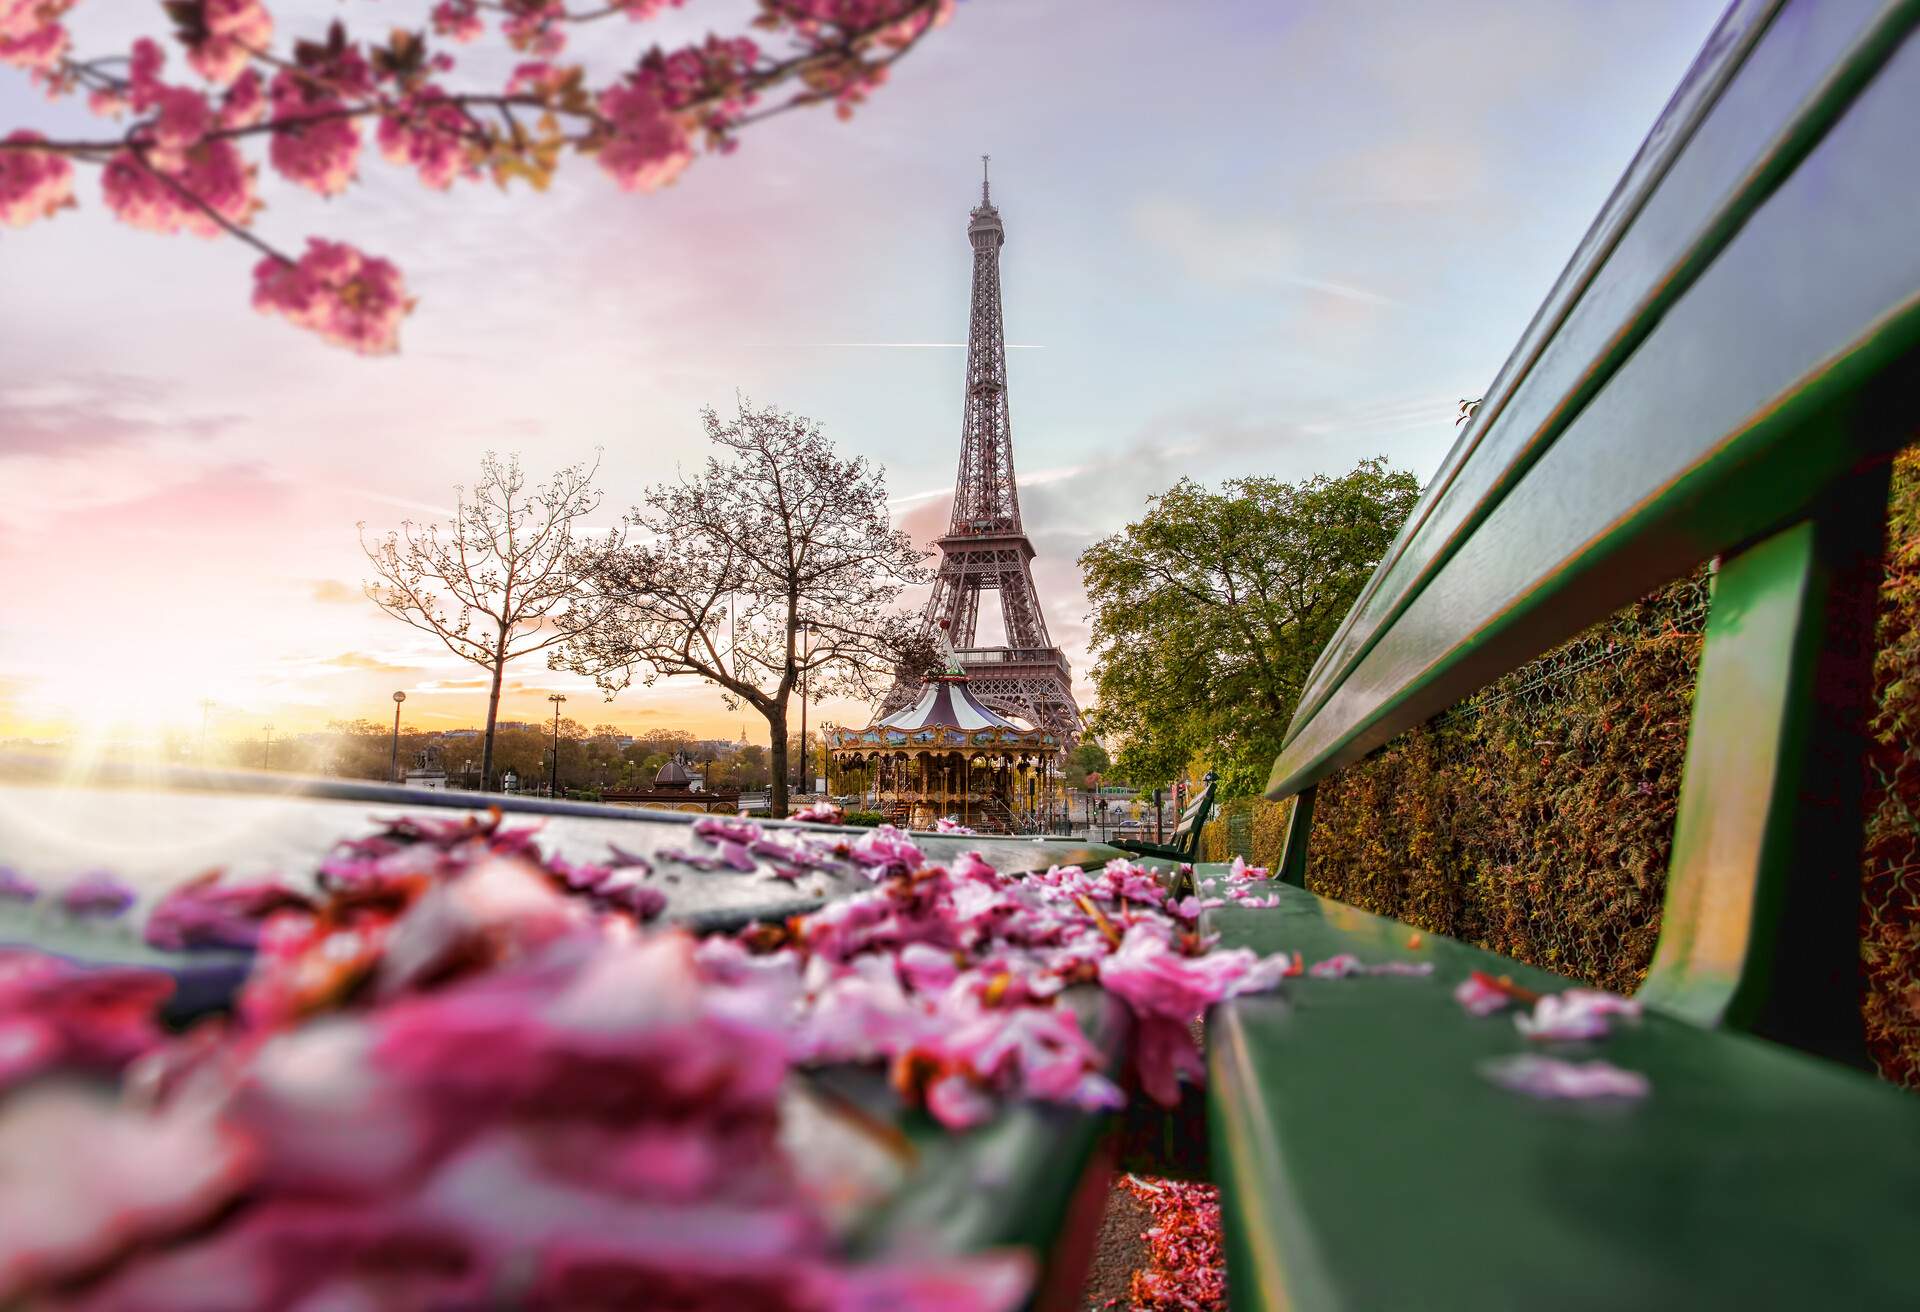 Eiffel Tower during spring time in Paris, France 